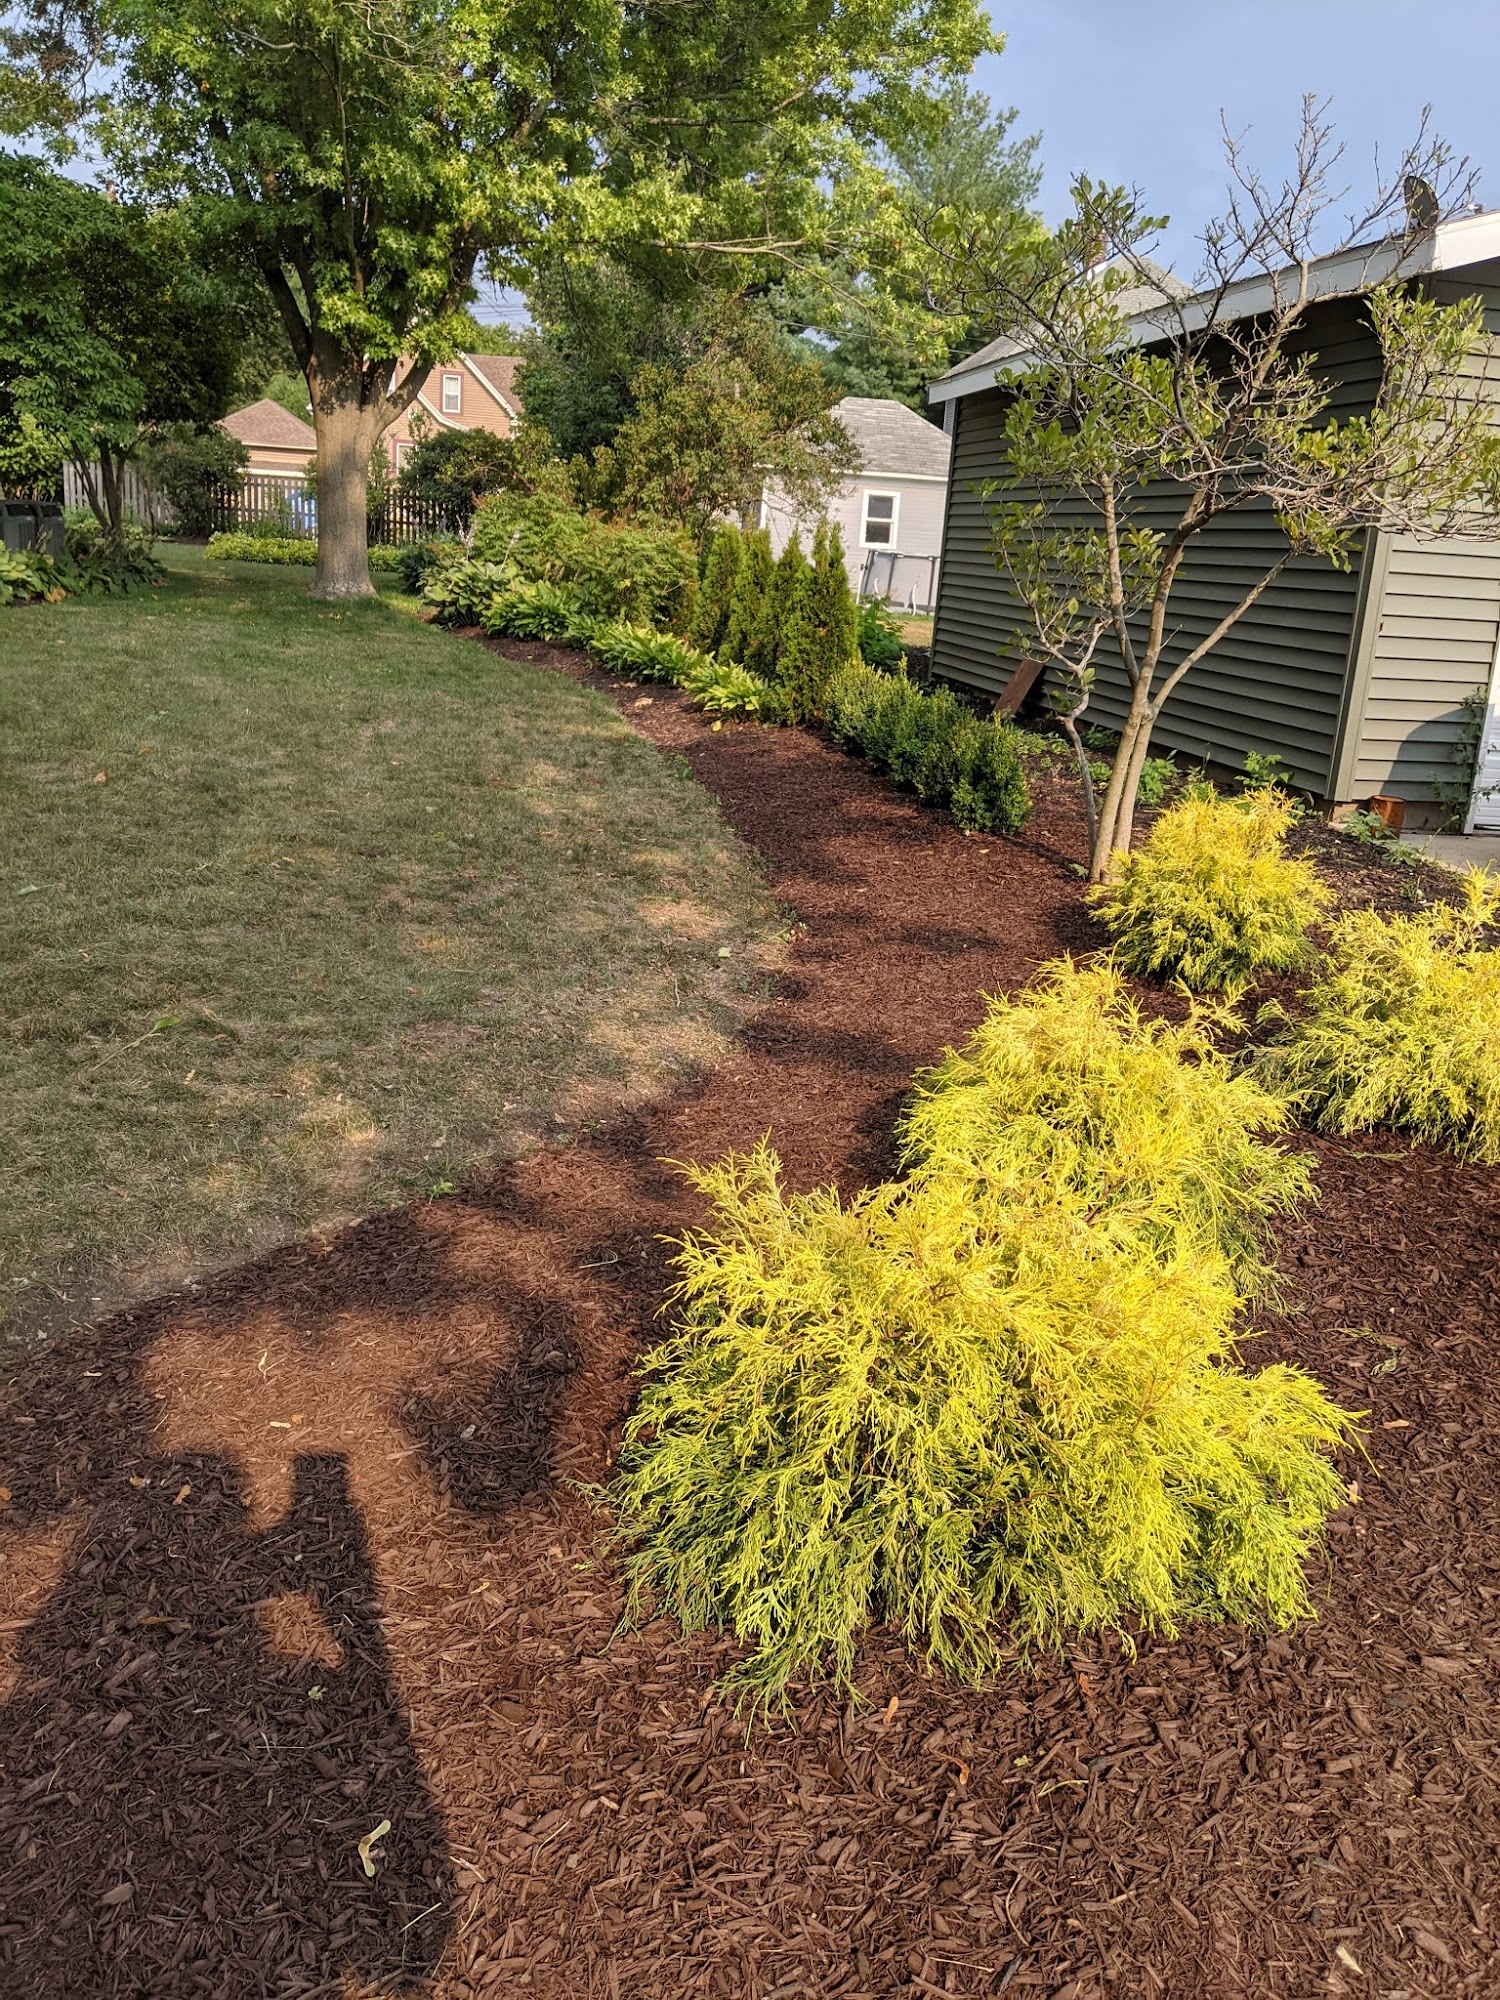 Artistic Landscape Design & Services 6002 S Holden Rd, Brodhead Wisconsin 53520